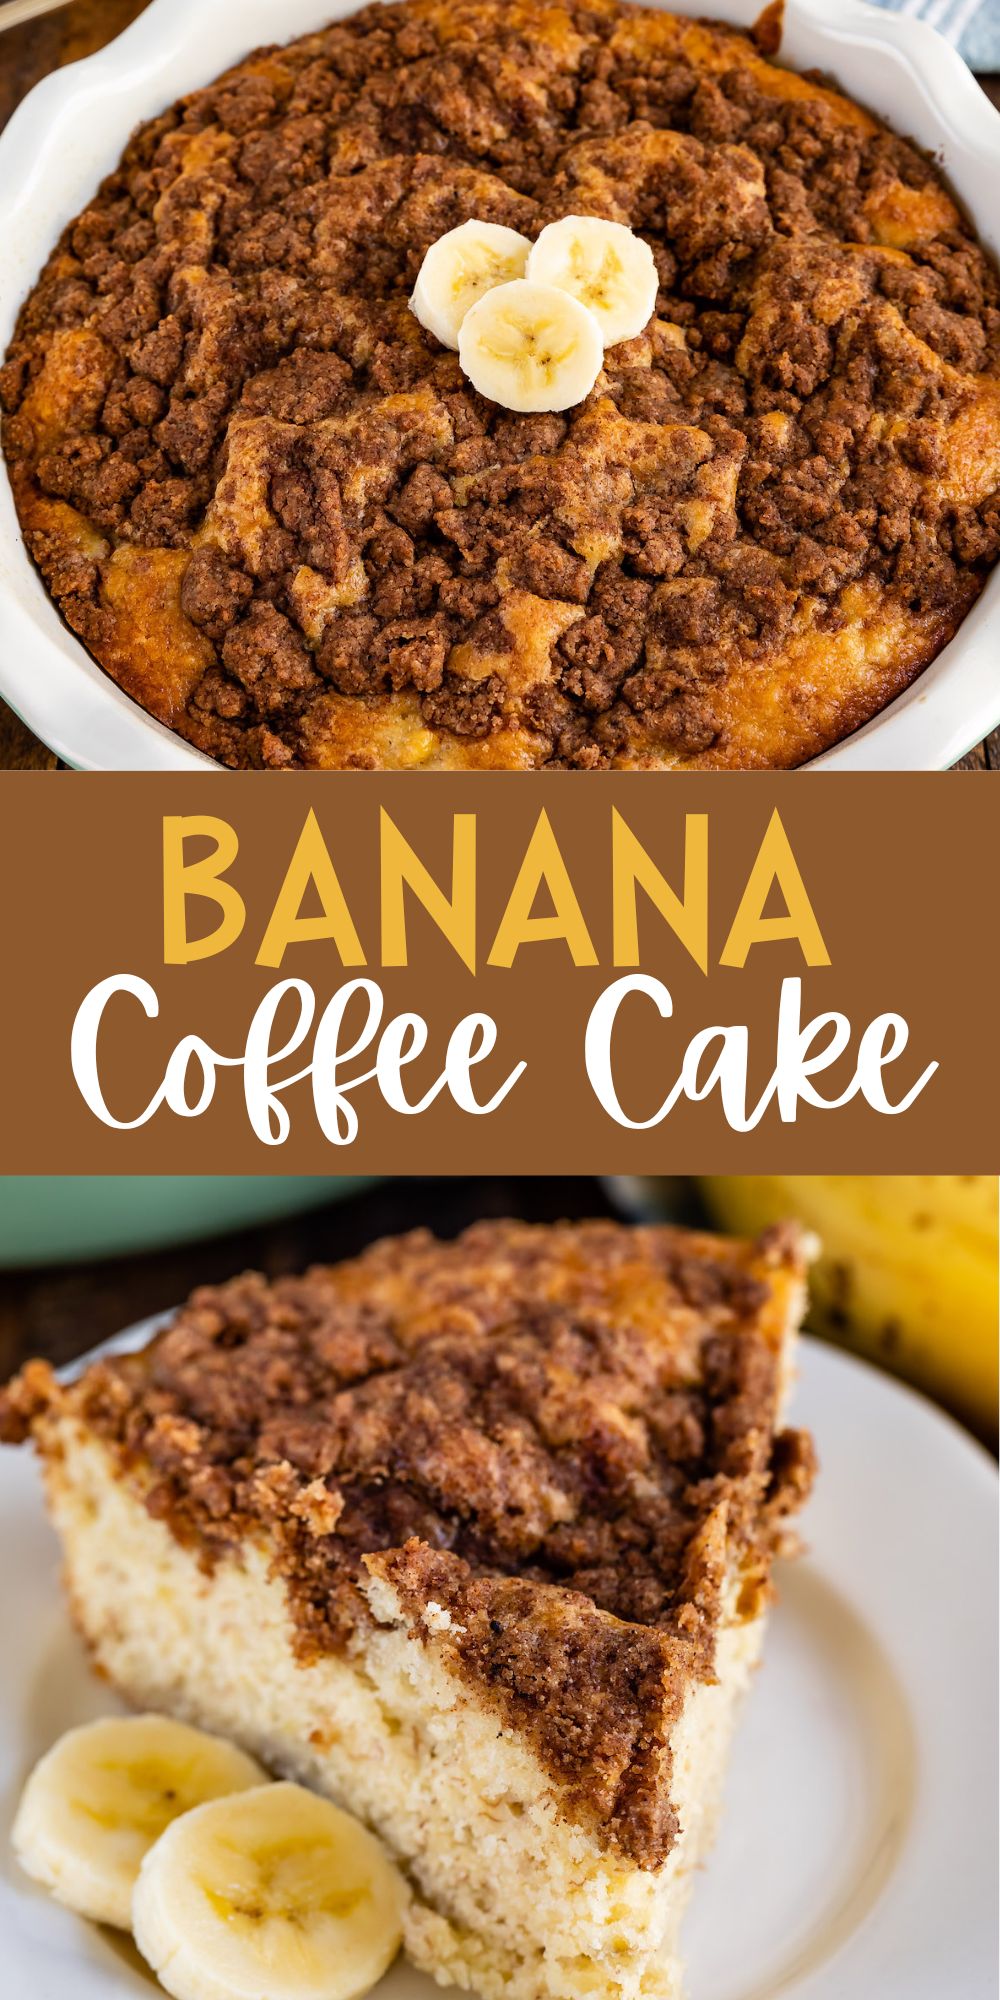 two photos of coffee cake on a white plate next to some banana slices with words on the photo.